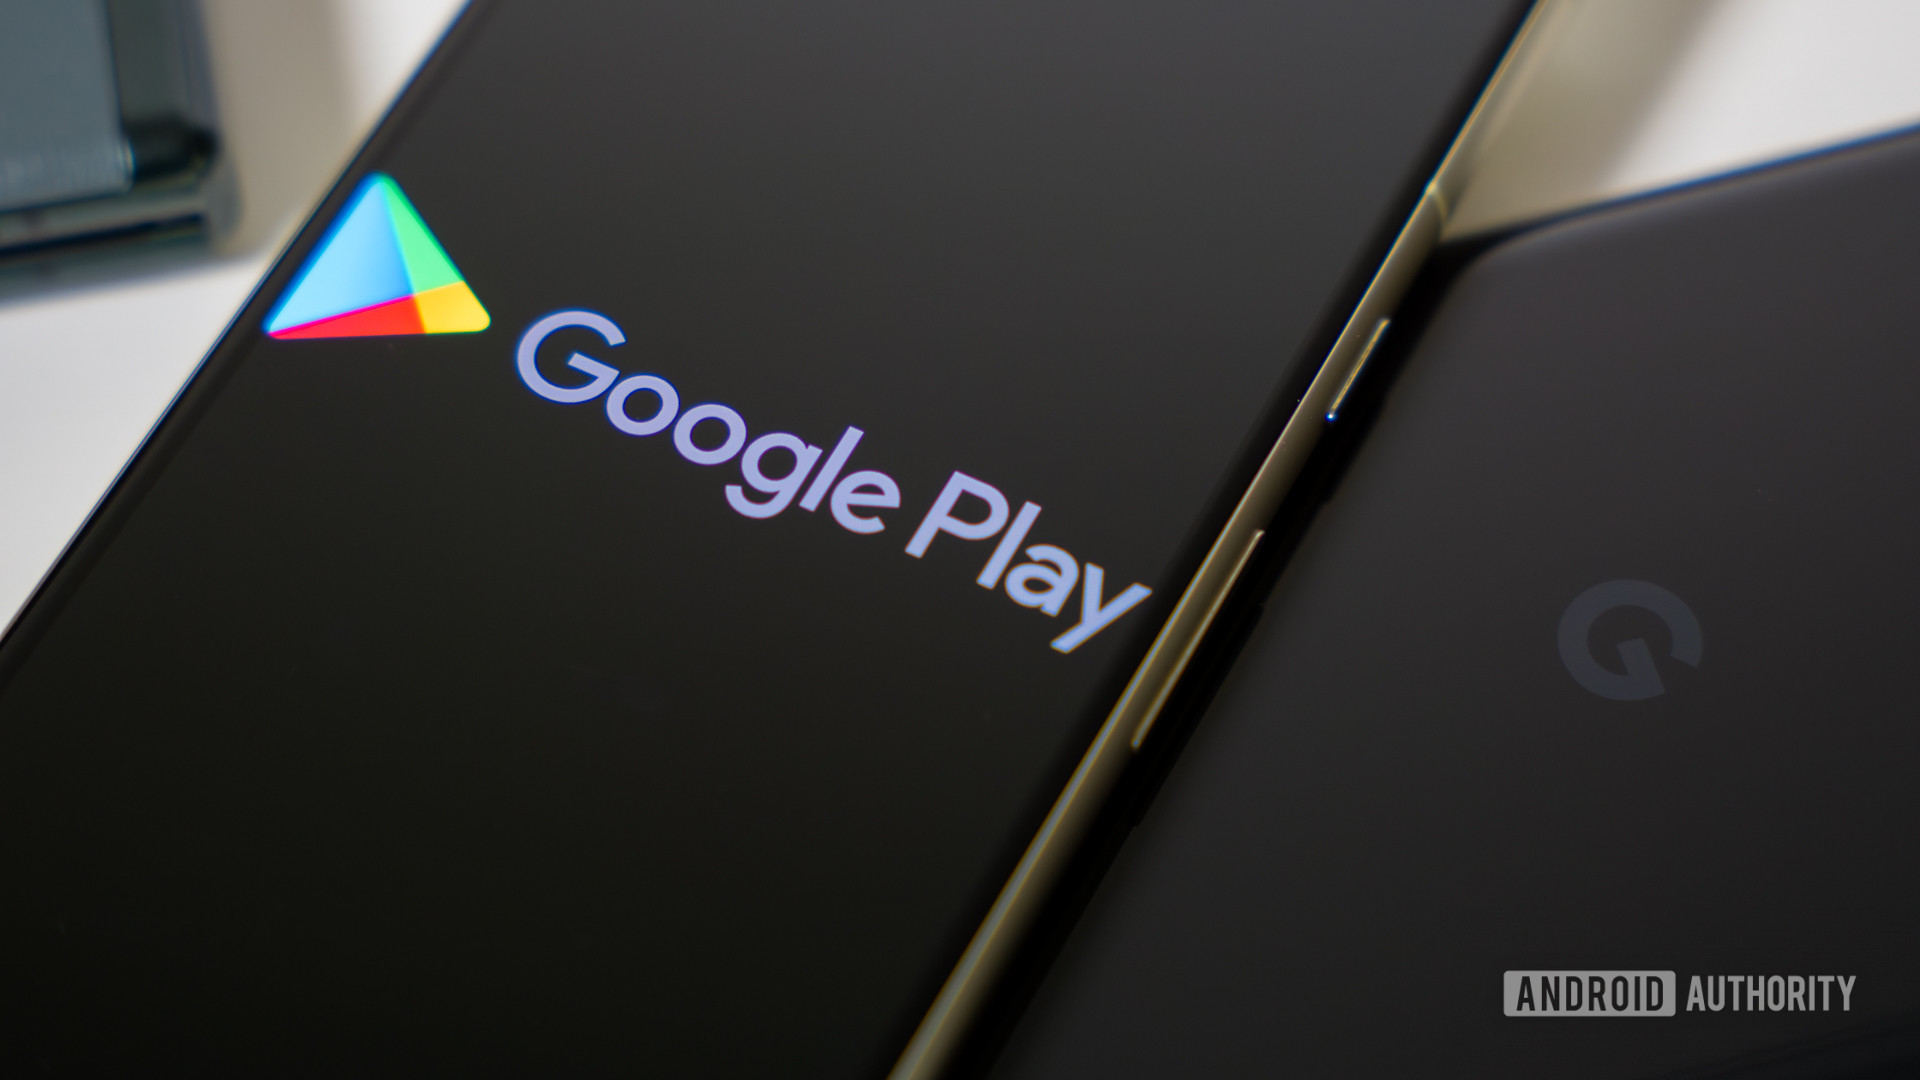 It wasn’t just you: The Google Play Store was down for many users